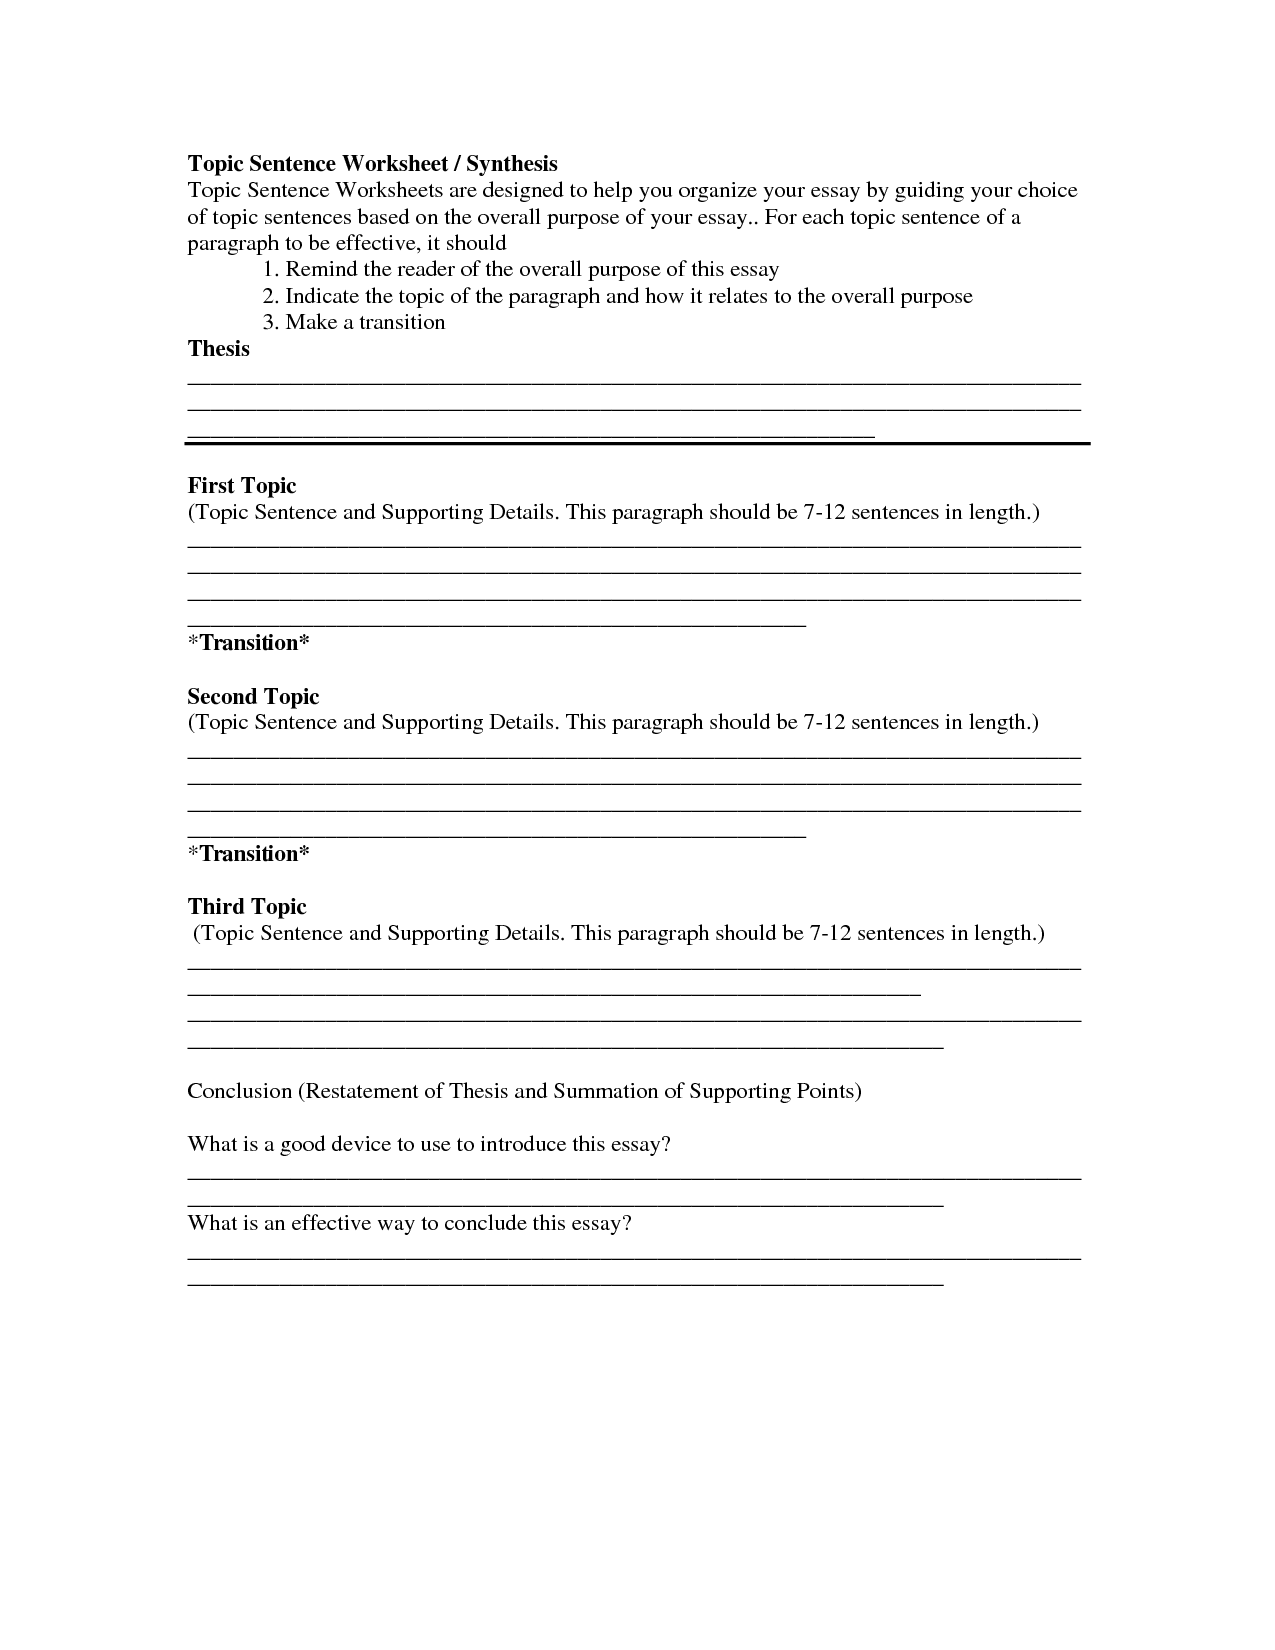 11-best-images-of-topic-sentence-worksheets-writing-topic-sentences-worksheets-topic-sentence